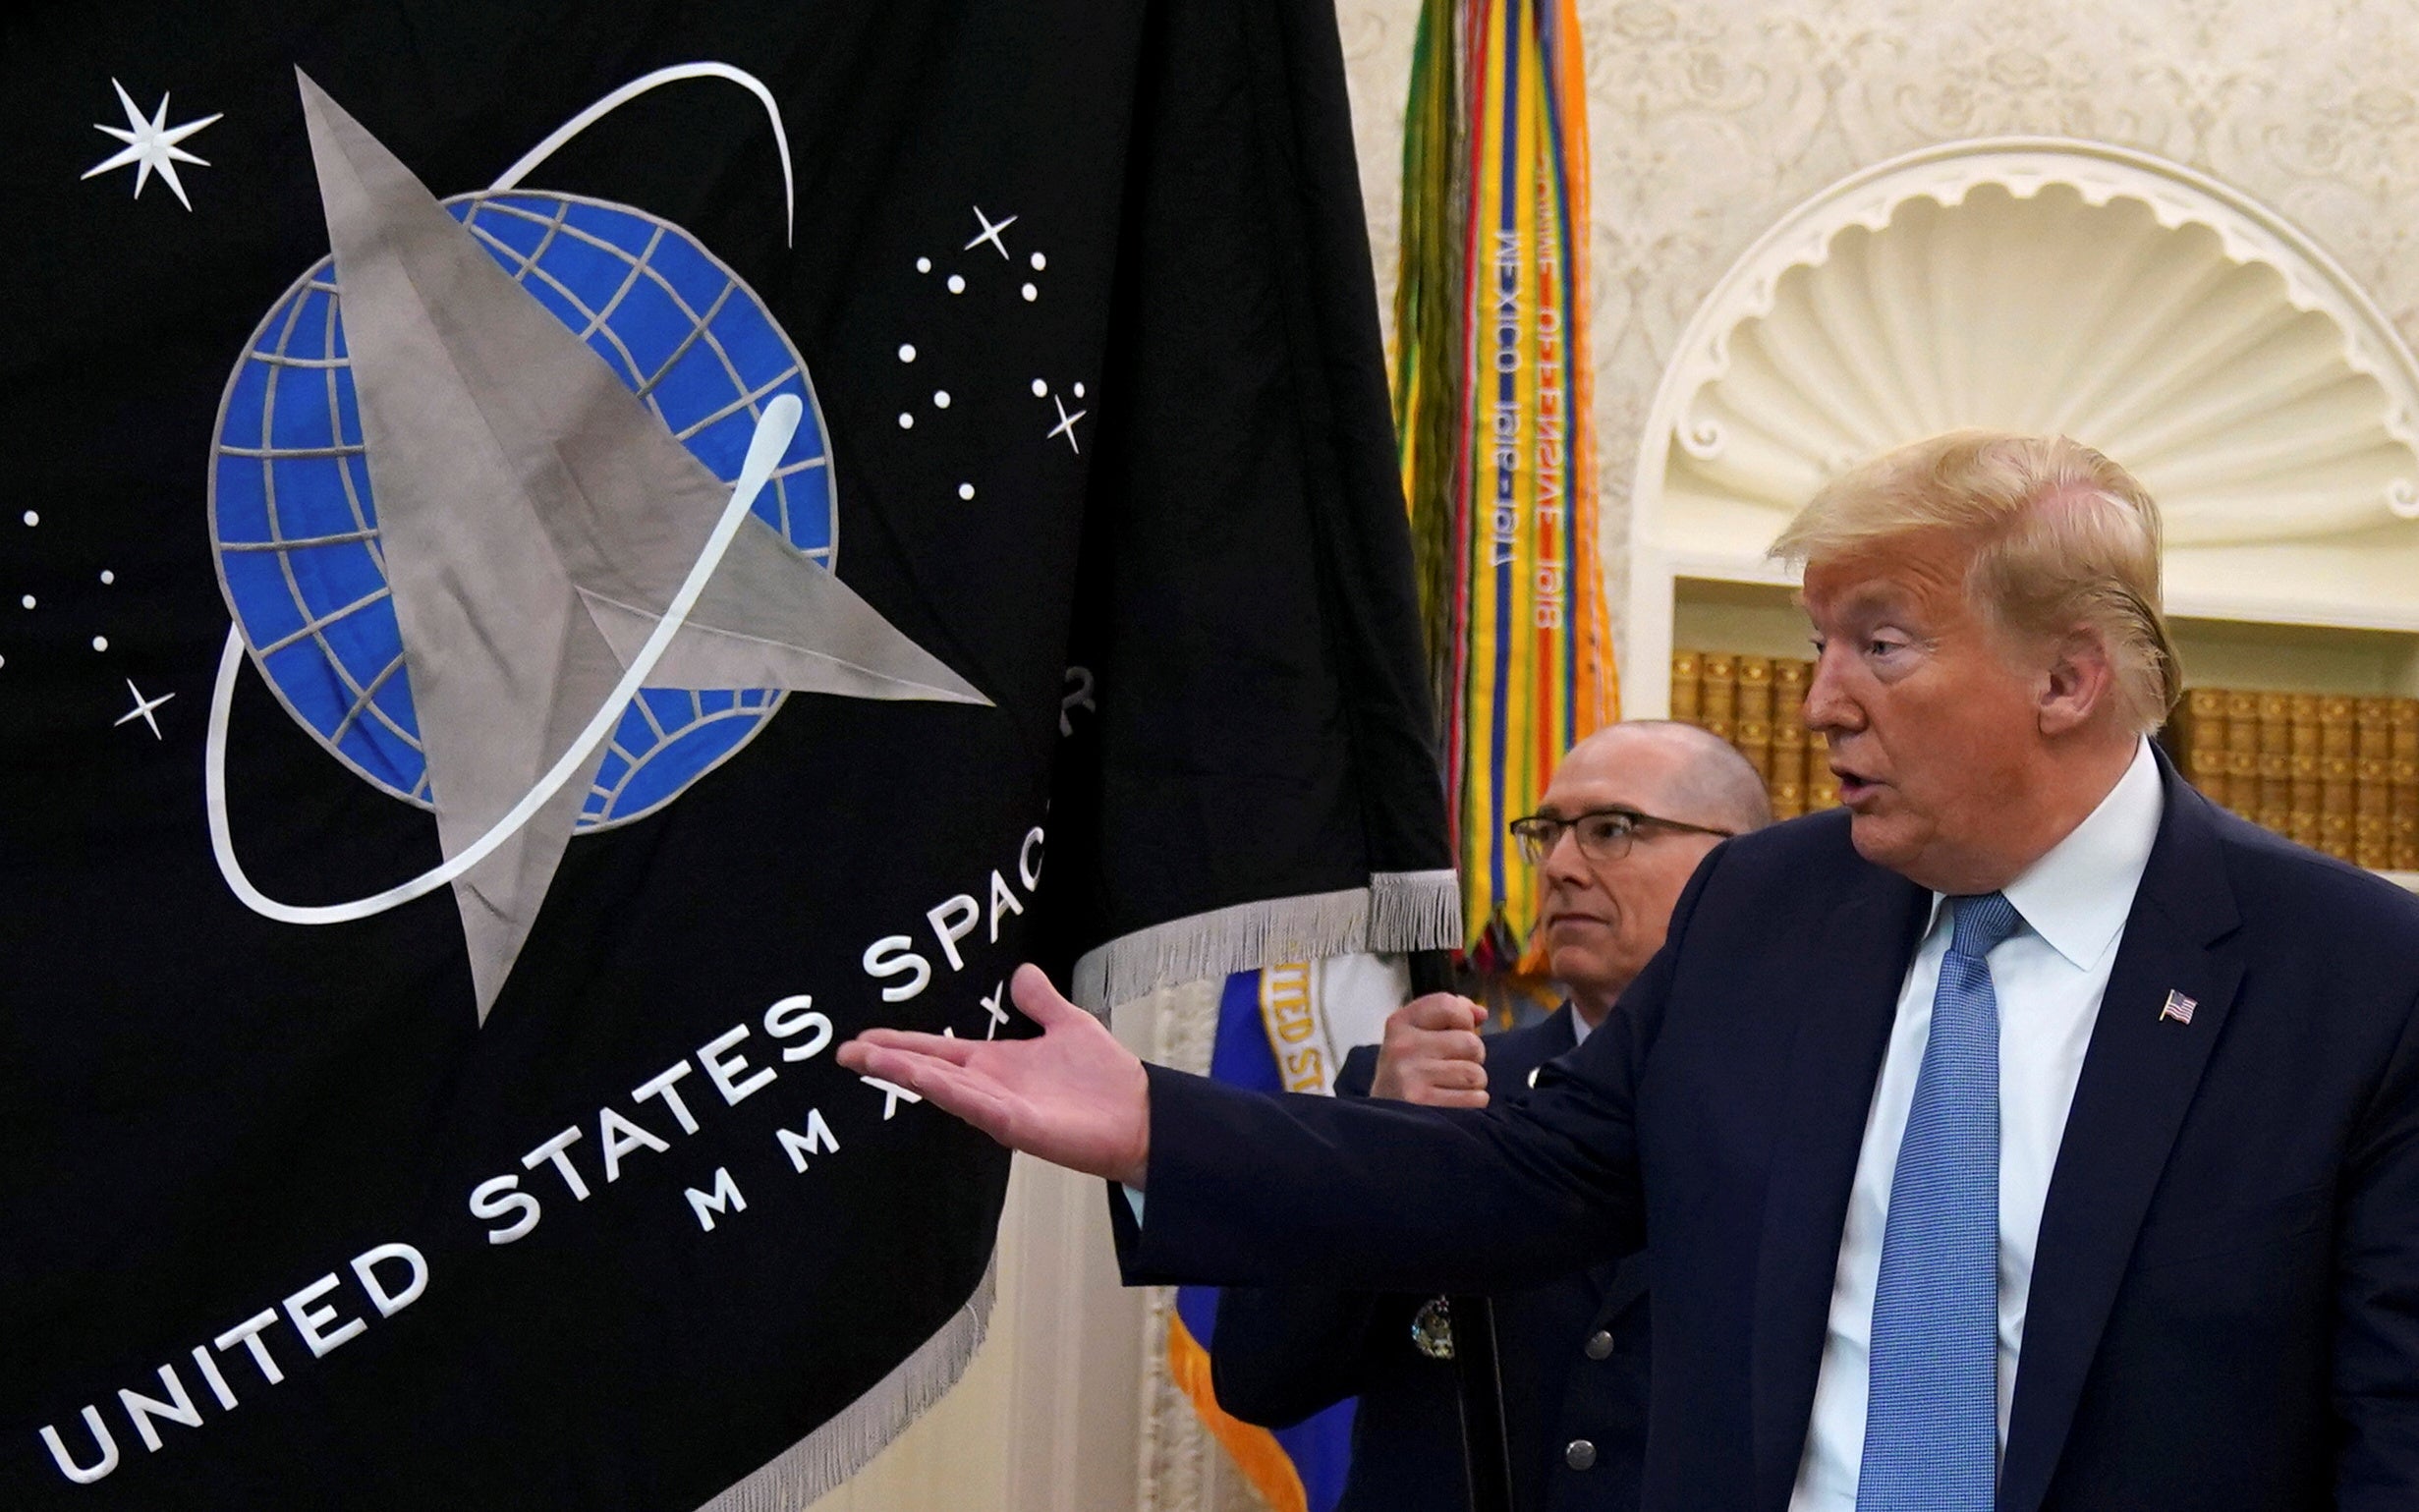 President Donald Trump gestures towards the U.S. Space Force flag during a presentation of the flag in the Oval Office of the White House in Washington, U.S., May 15, 2020